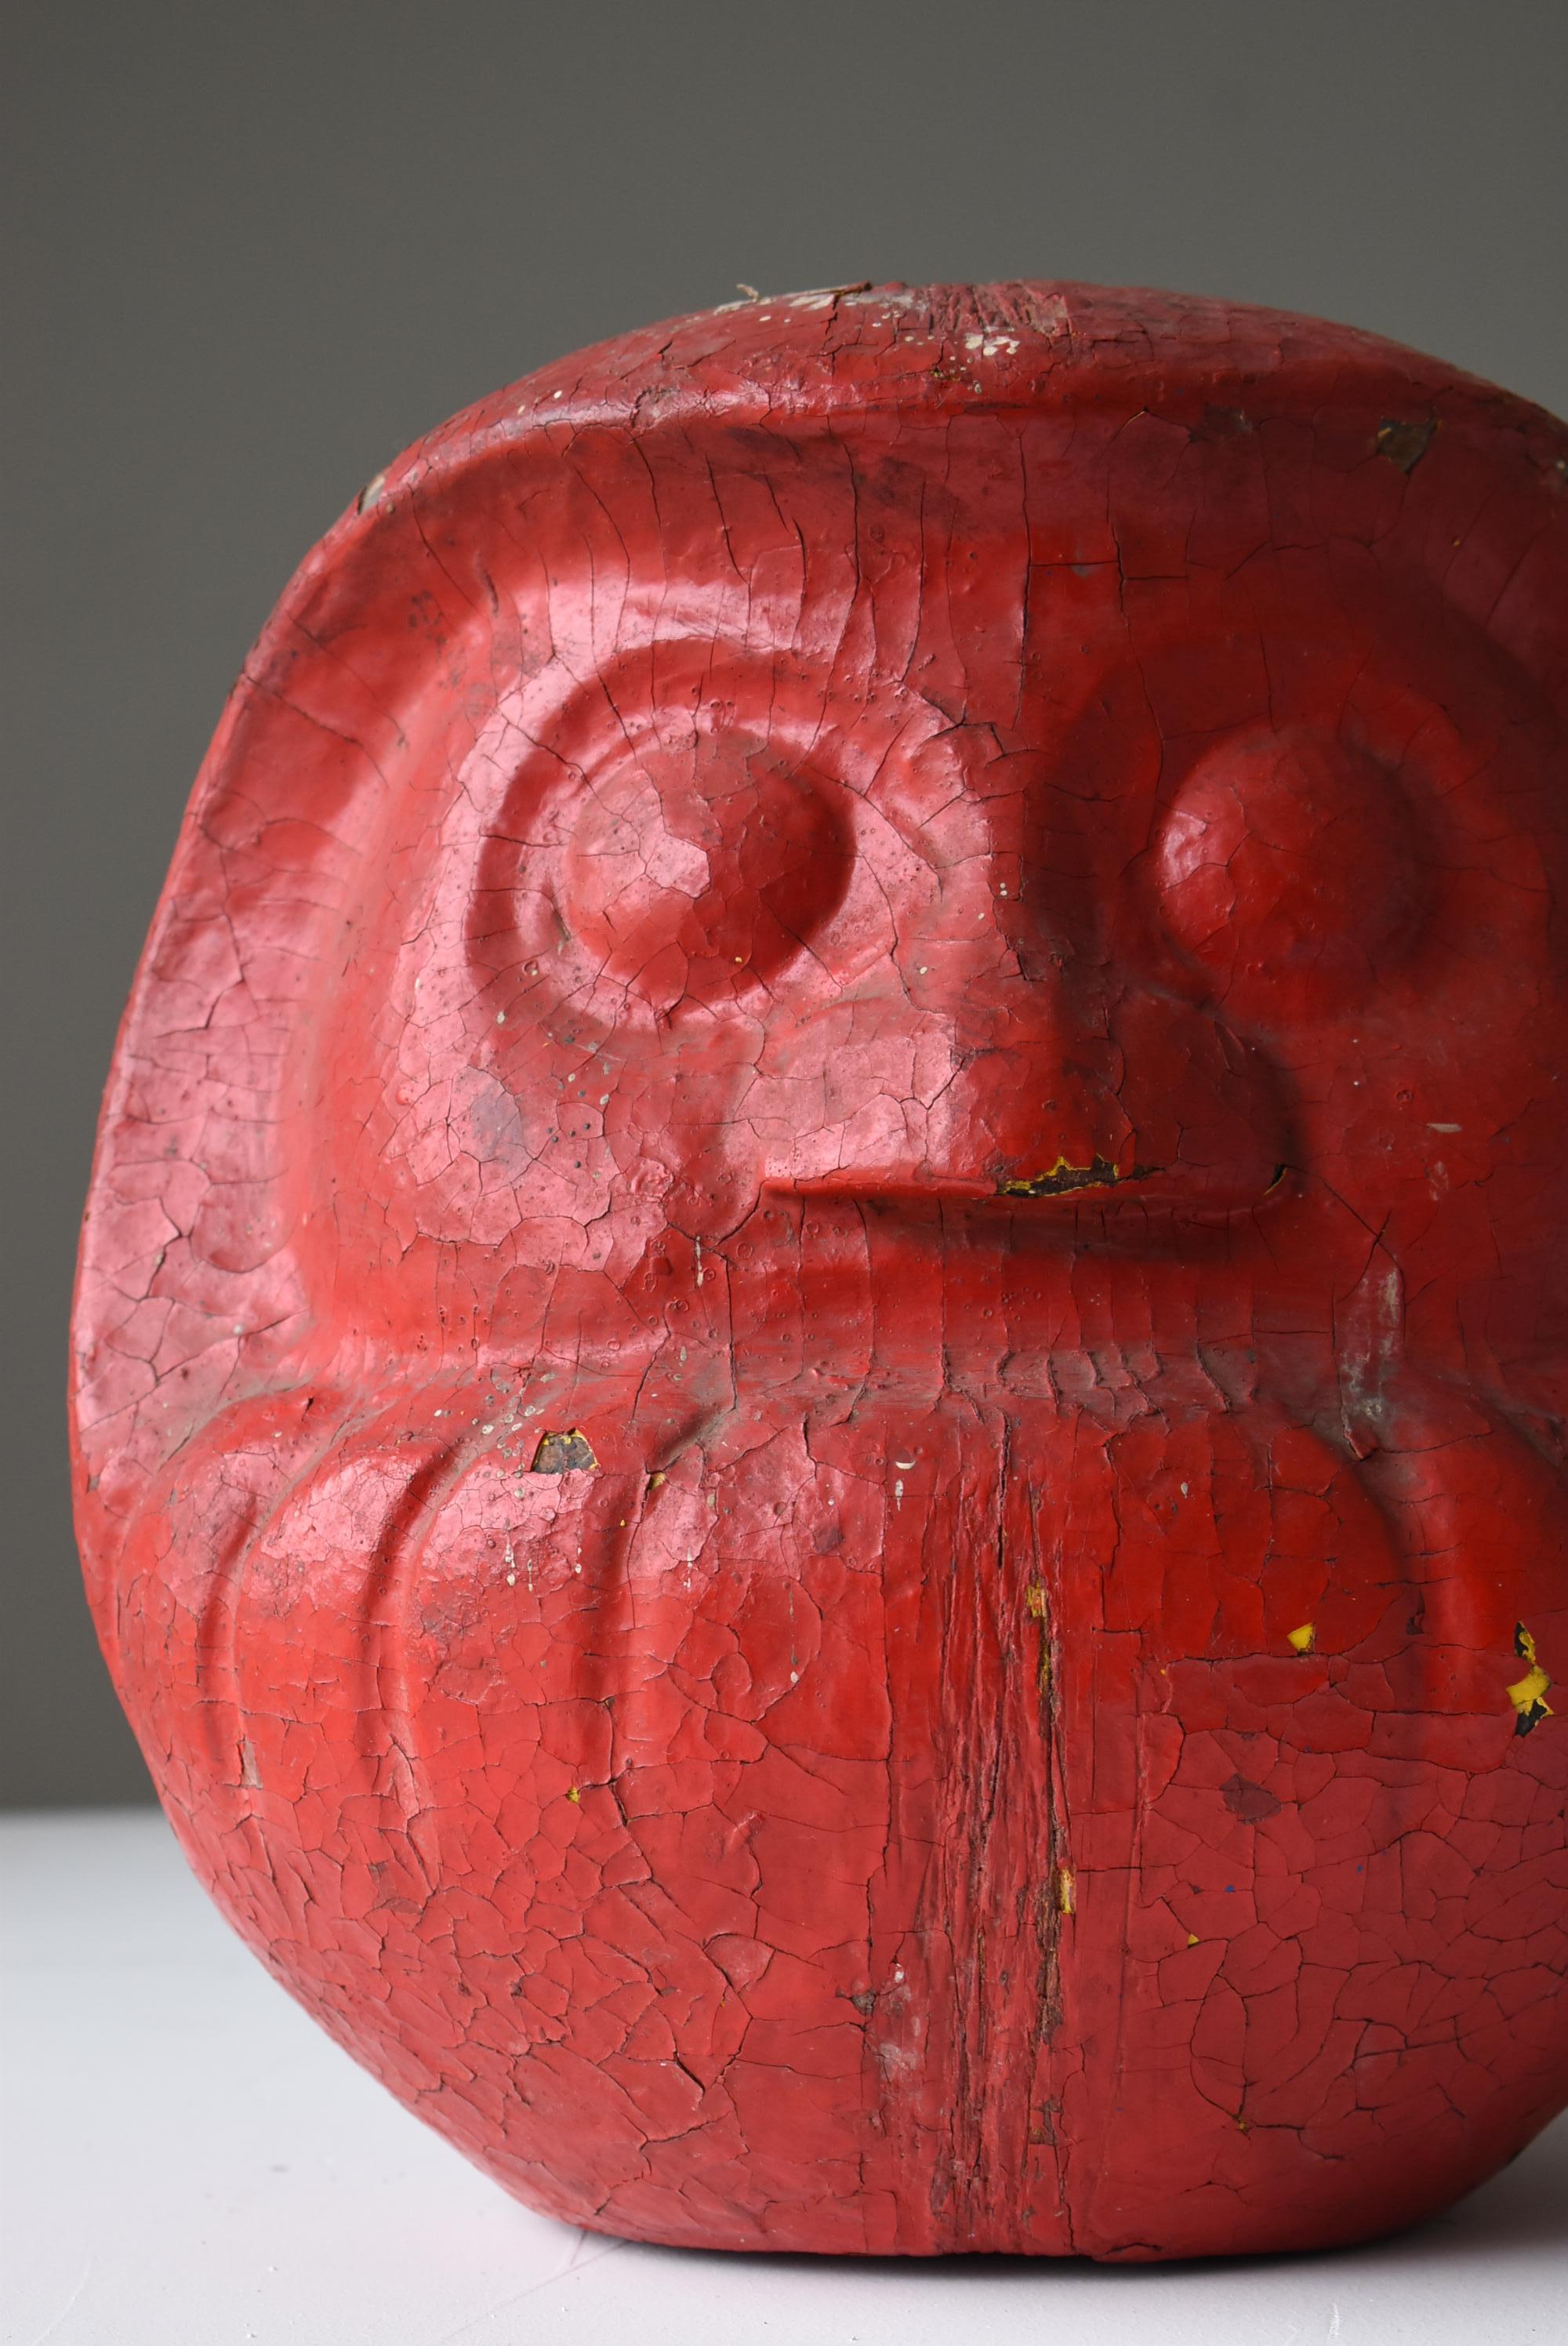 It is an old Japanese Daruma doll.
In Japan, Daruma dolls are generally painted in red. Red, the color of fire and blood, has long been believed to have an amulet effect.

There are many wood carvings, but this is pottery.
The whole is painted